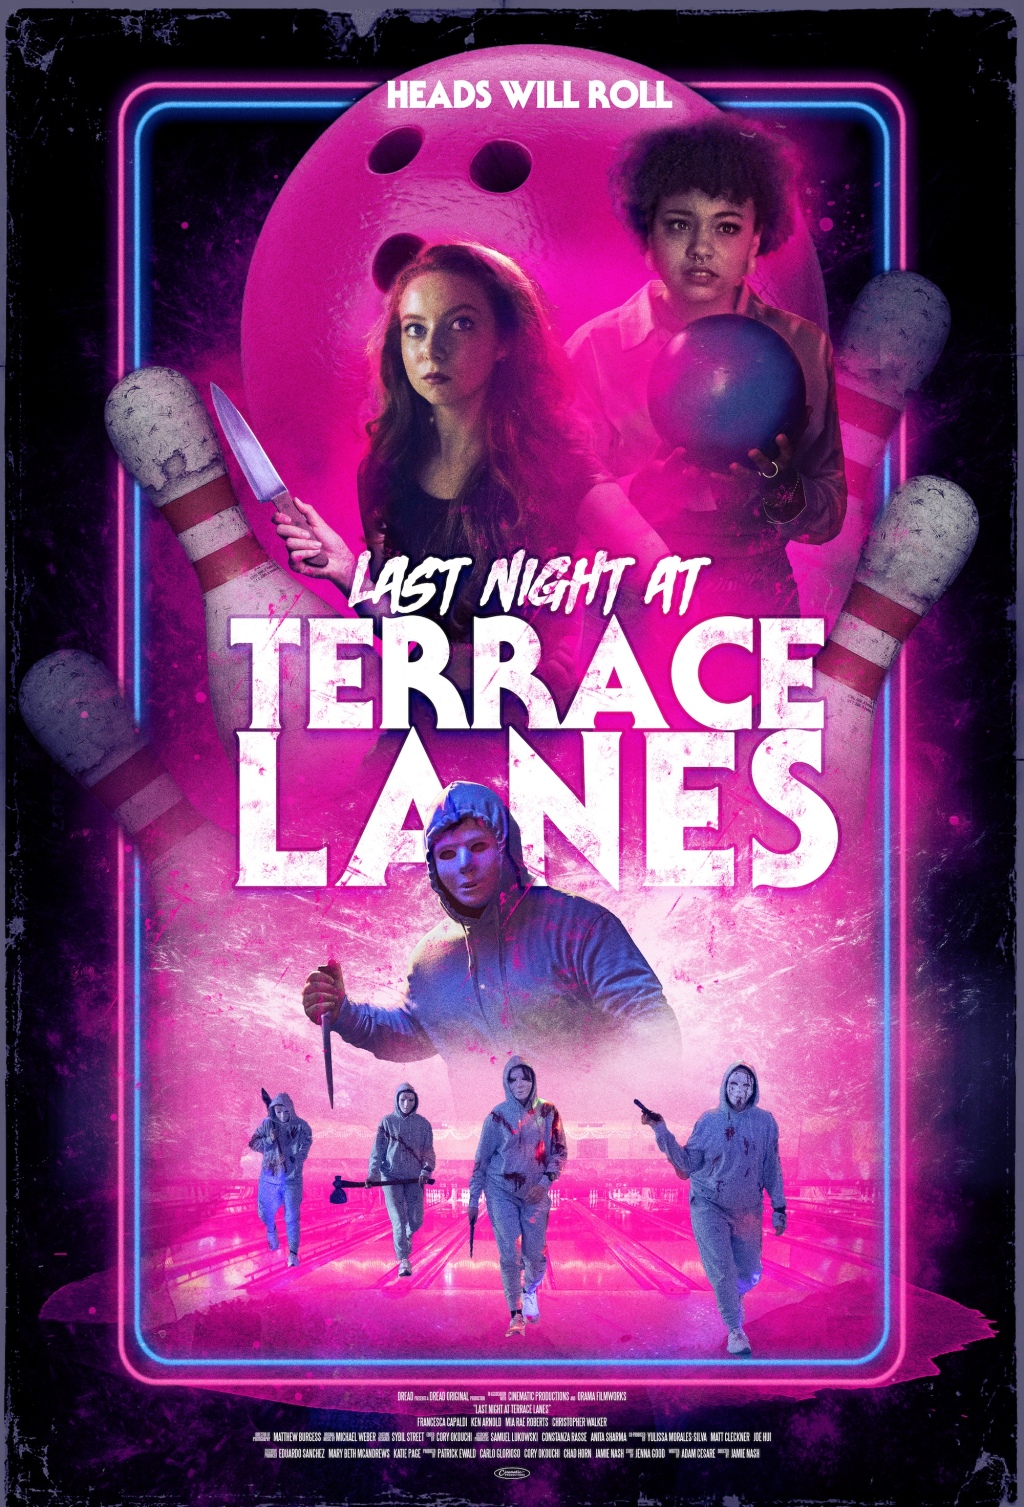 Last Night at Terrace Lanes Review — Whacky premise falls straight into the gutter